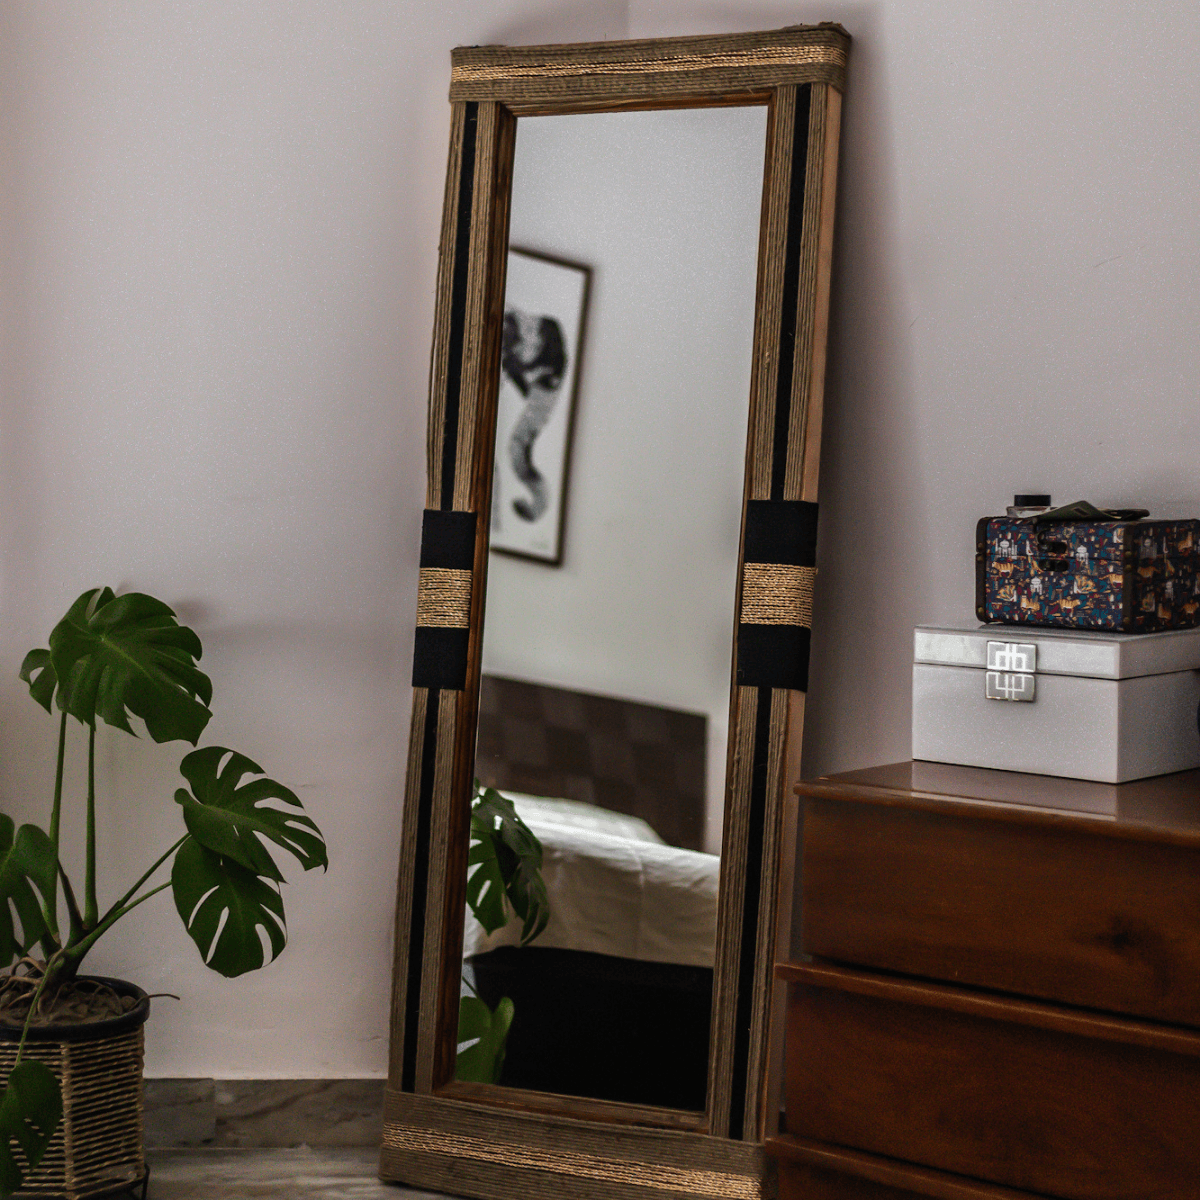 Regalis Jute & Cotton Mirror - Sirohi.org - Colour_Gold, Purpose_Home Accessory, Rope Material_Natural Jute Fibre, Rope Material_Plastic Waste, Rope Material_Recycled Cotton